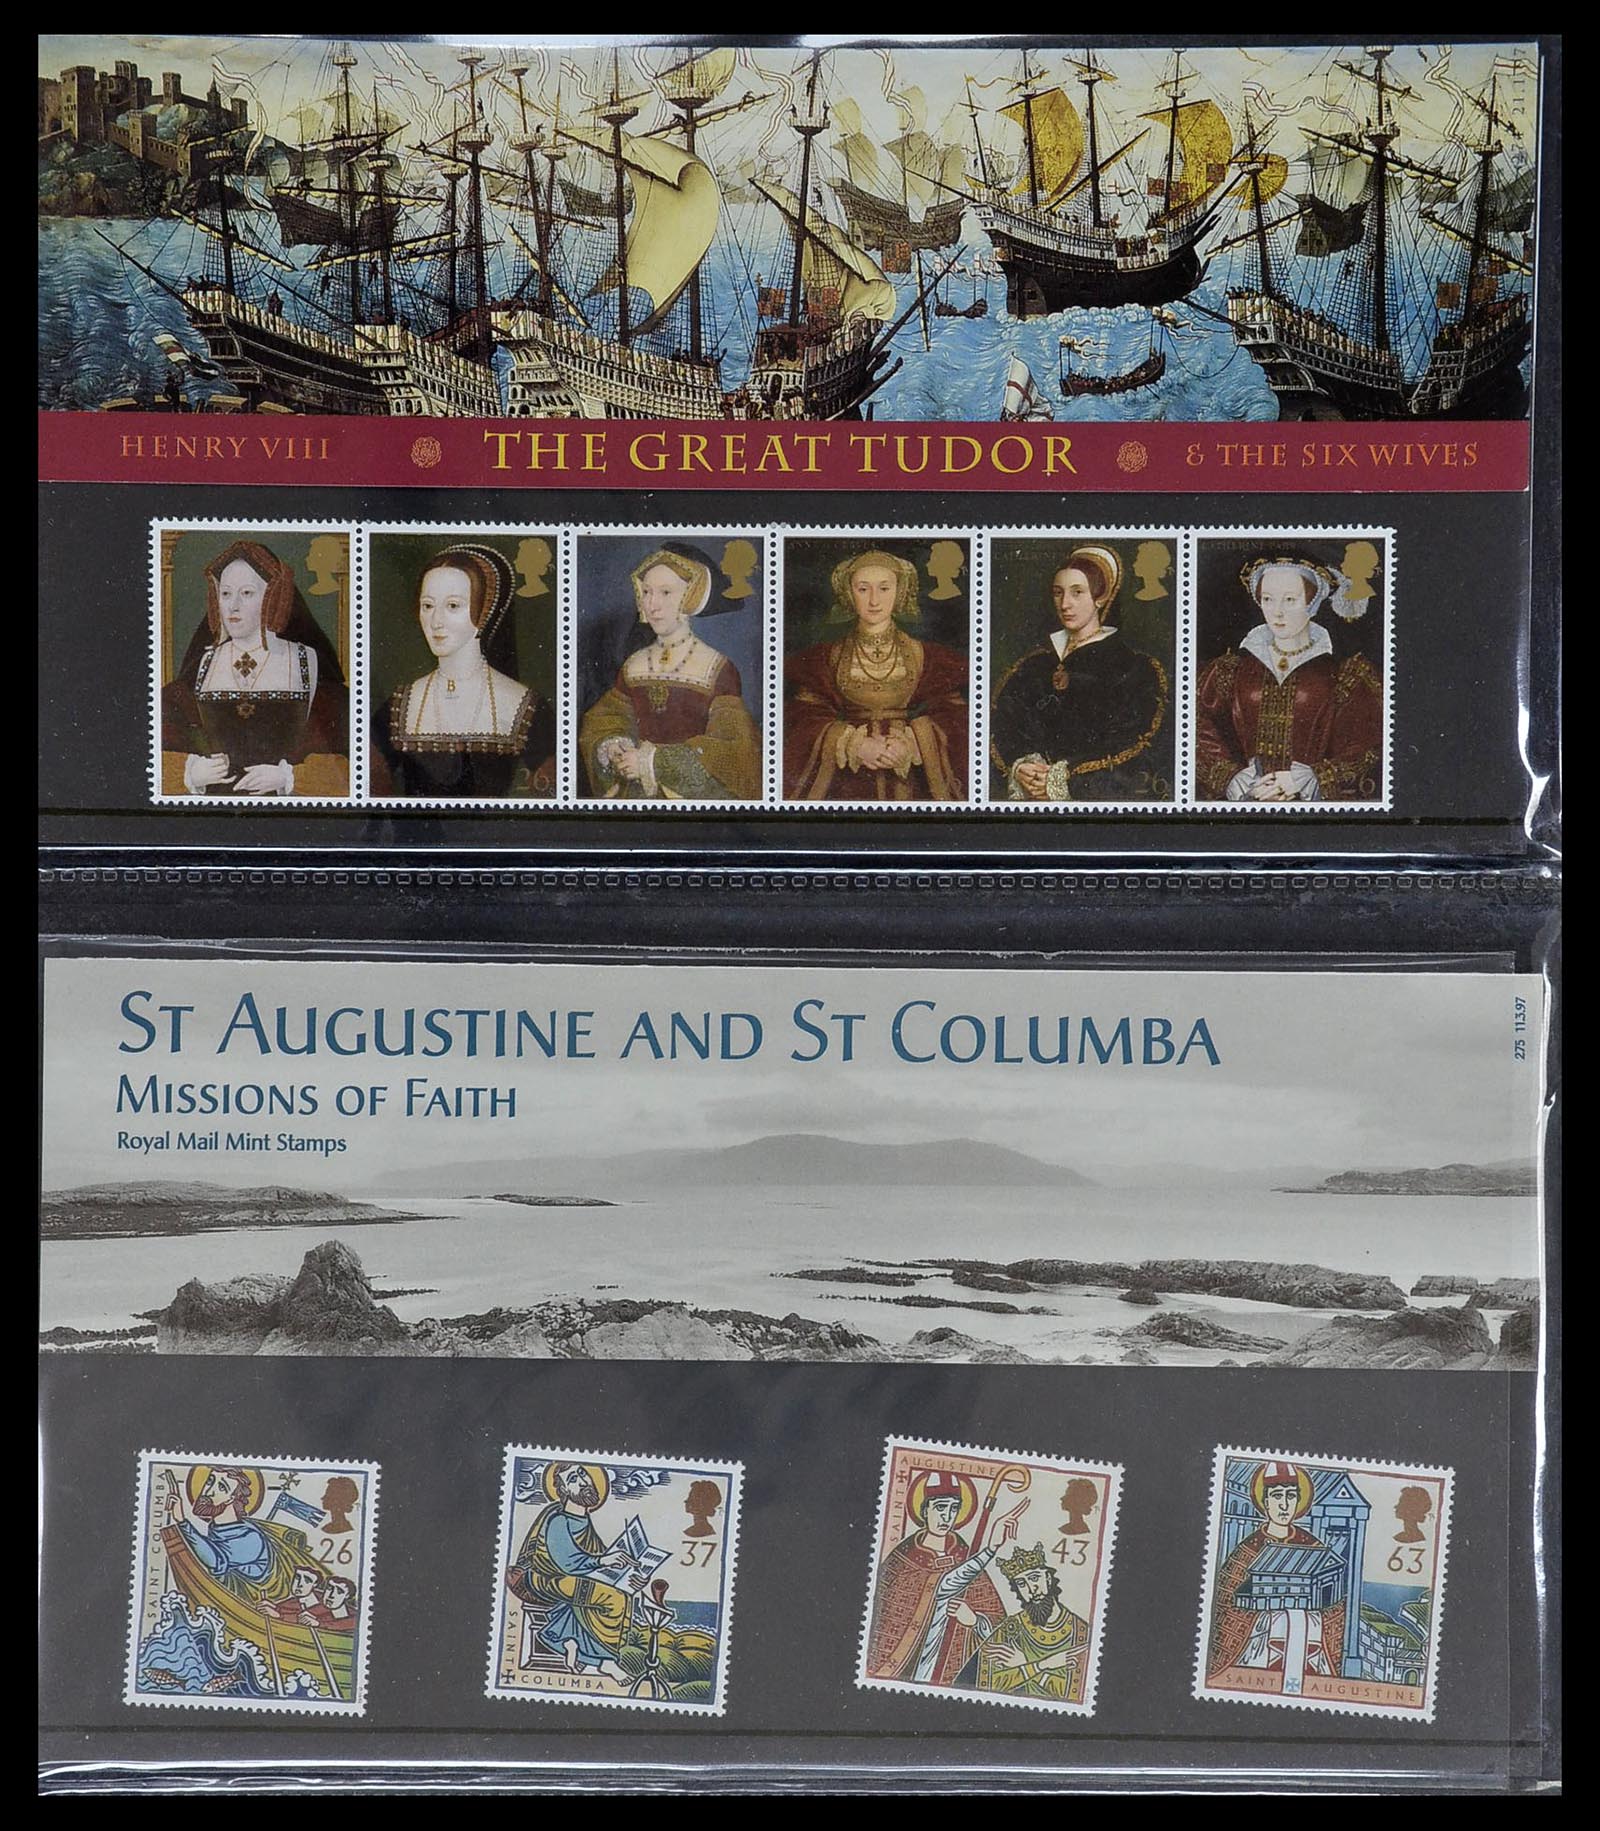 34029 086 - Stamp collection 34029 Great Britain presentation packs 1978-2004.